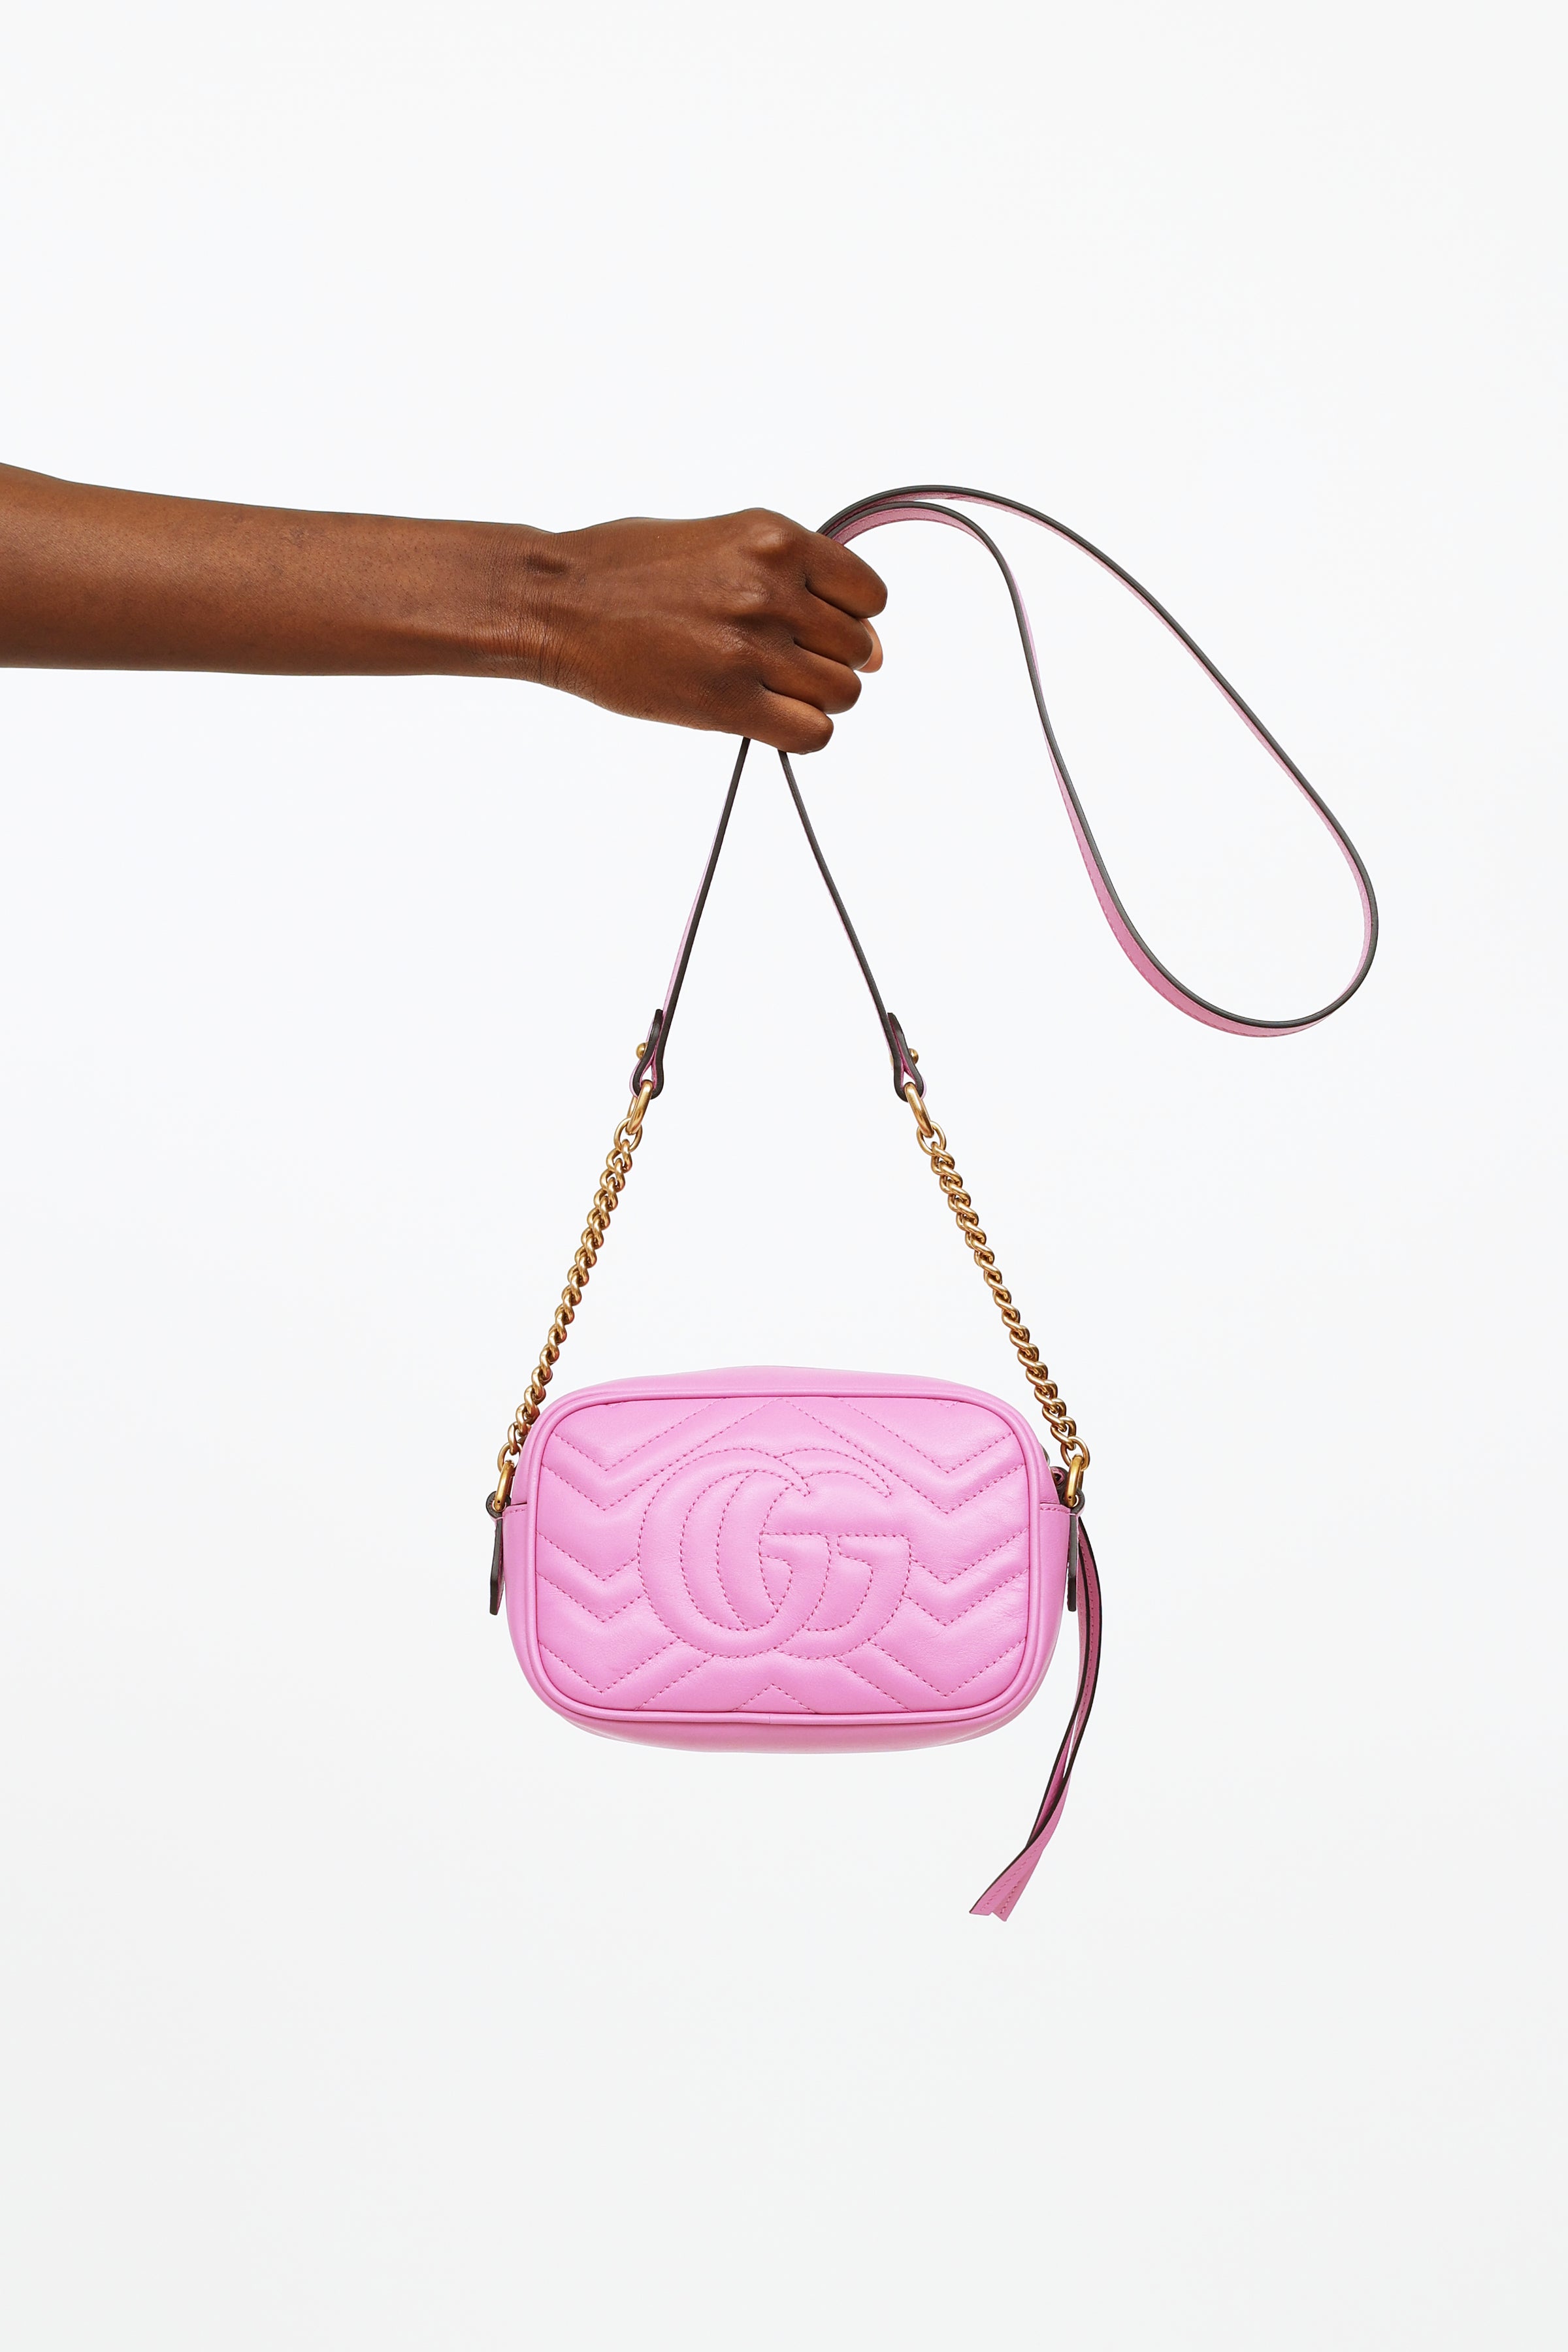 Mini GG Marmont Camera Bag Pink GHW